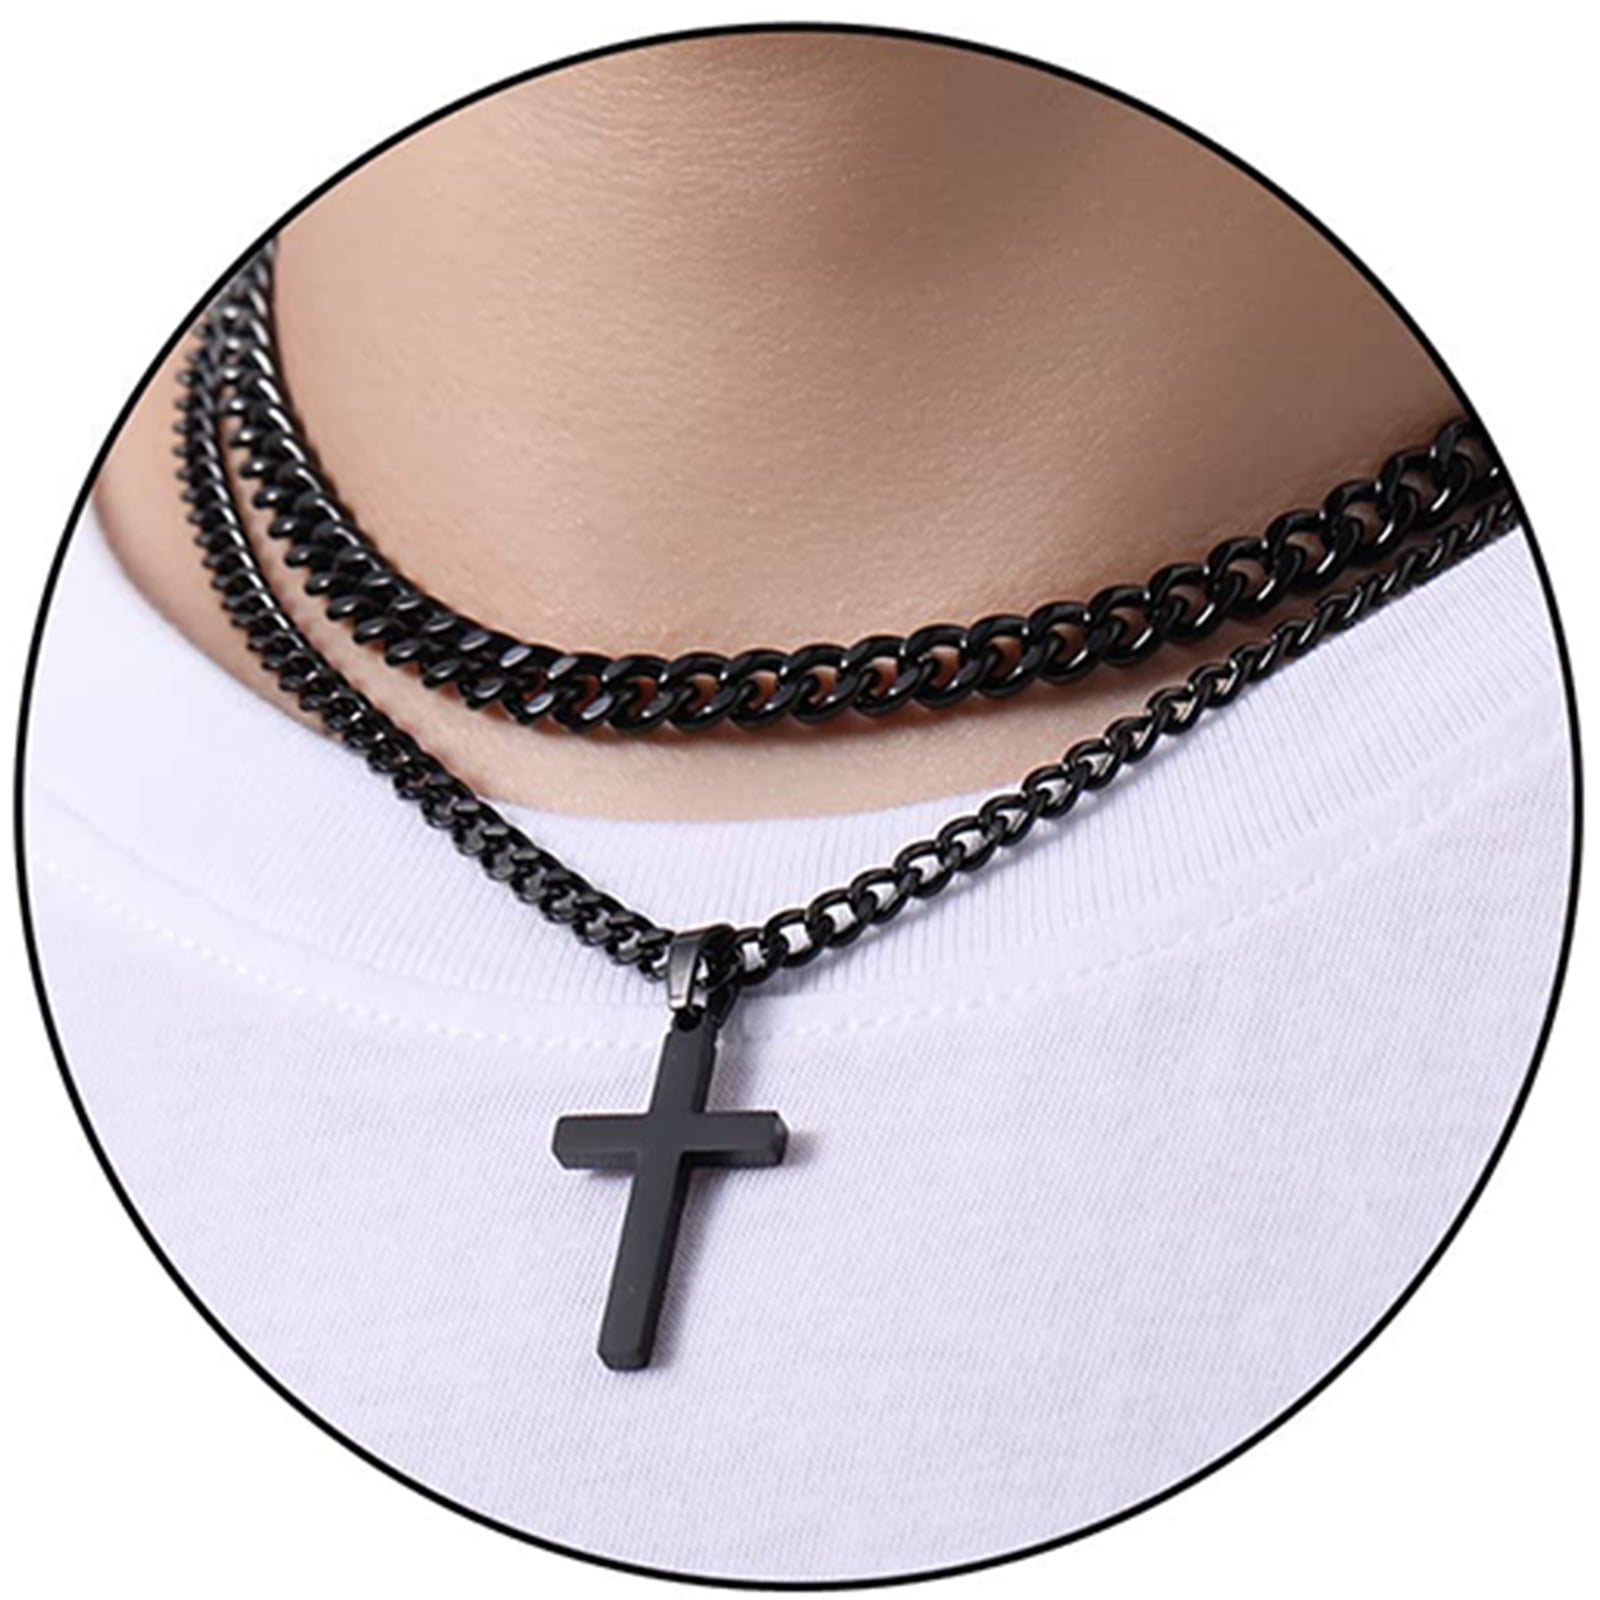 APSVO Layered Black Cross Necklace for Men Boys Stainless Steel Layered Cuban Link Chain Cross Pendant Necklaces Set Religious Jewelry Gifts 1874eff8 31be 4089 a9aa baa6ed56cf40.abc957b3e3371023b3424ea7e4adcb7d